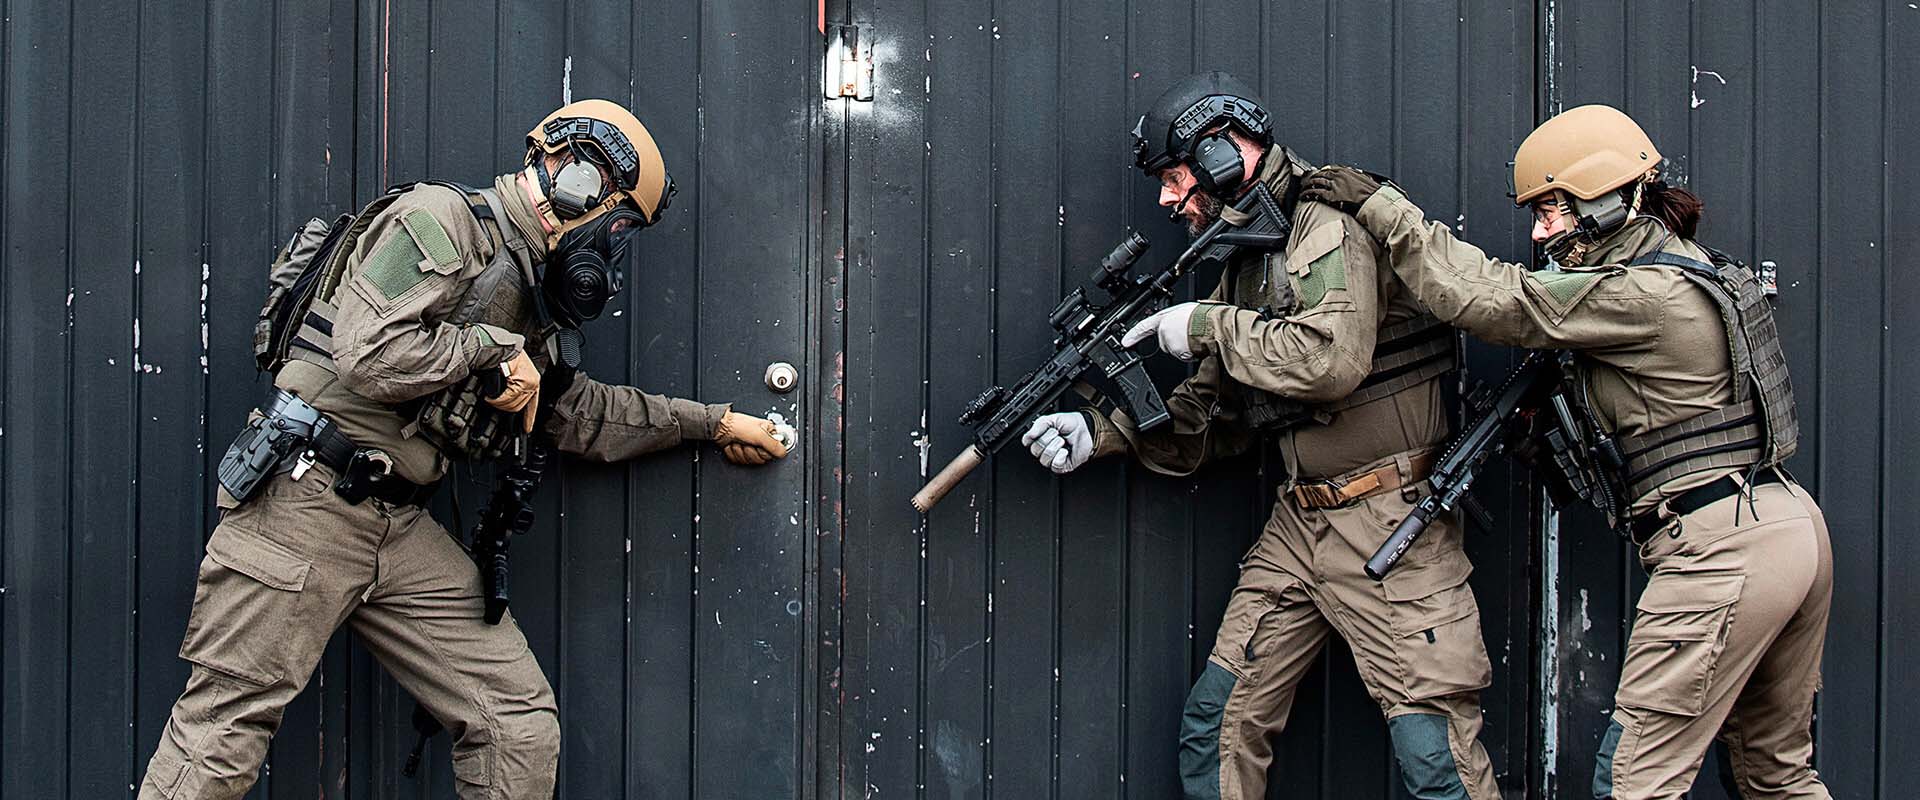 Police law enforcement personnel at door wearing Torraka tactical clothing and uniform system